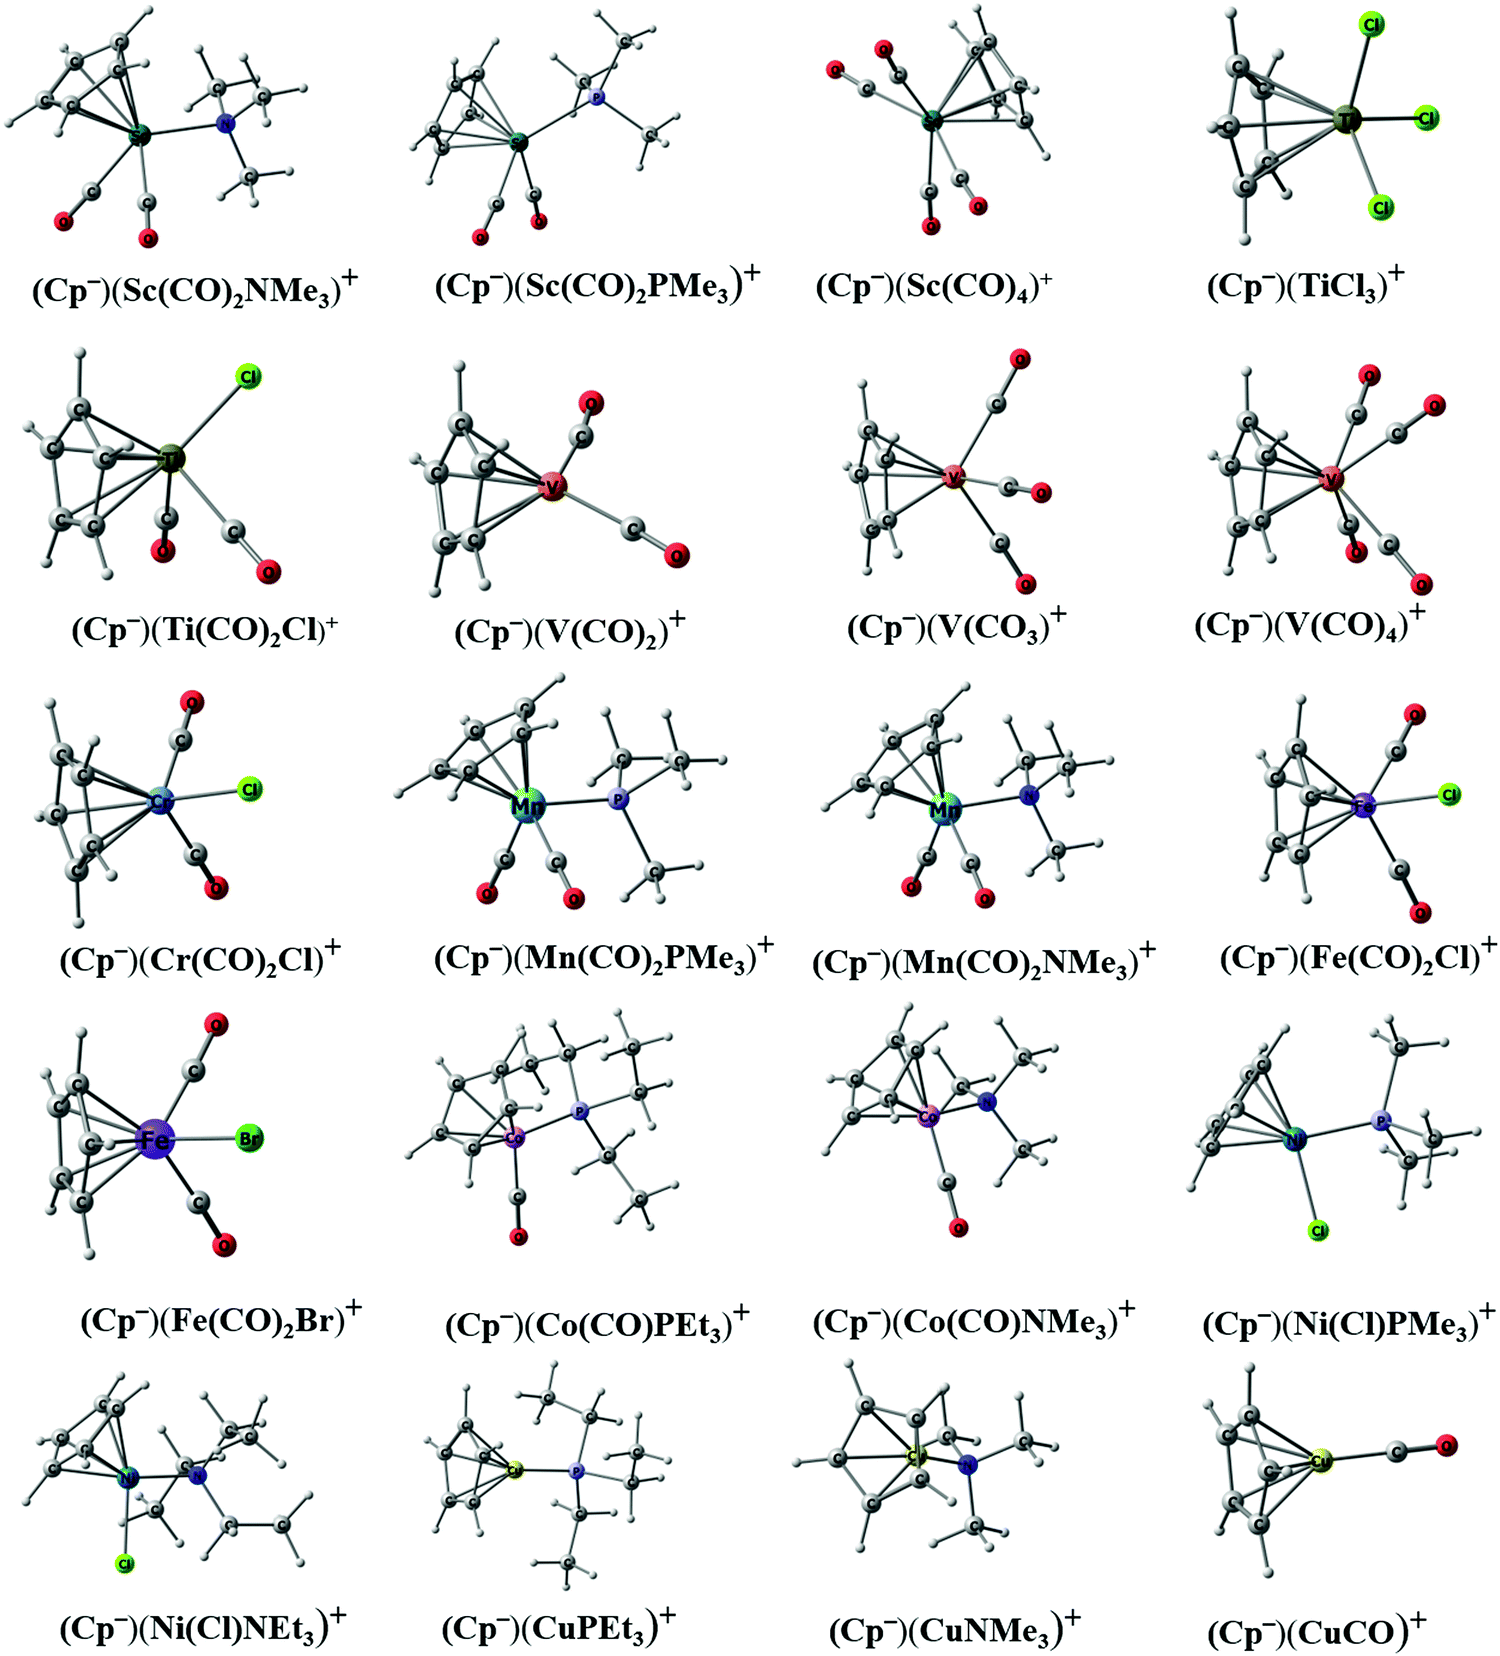 Endo And Exohedral Chloro Fulleride As H5 Ligands A Dft Study On The First Row Transition Metal Complexes Physical Chemistry Chemical Physics Rsc Publishing